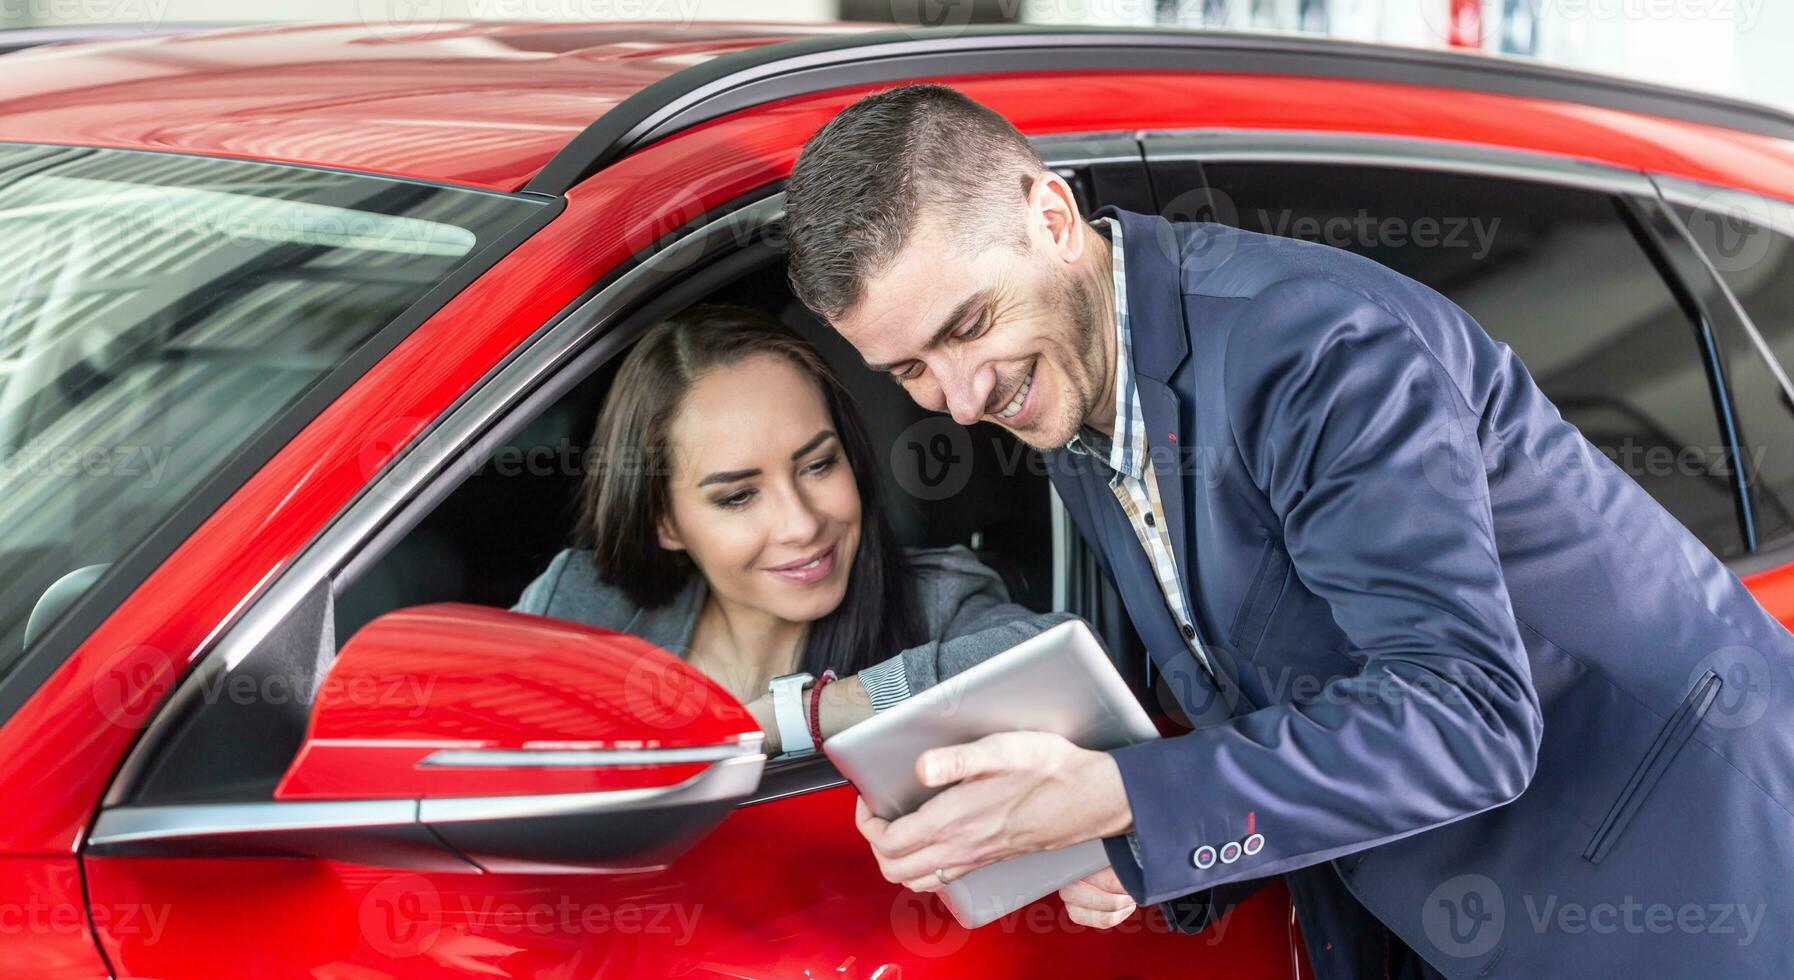 Car dealership employee with tablet shows woman intending to buy a red car she sits in technical features photo